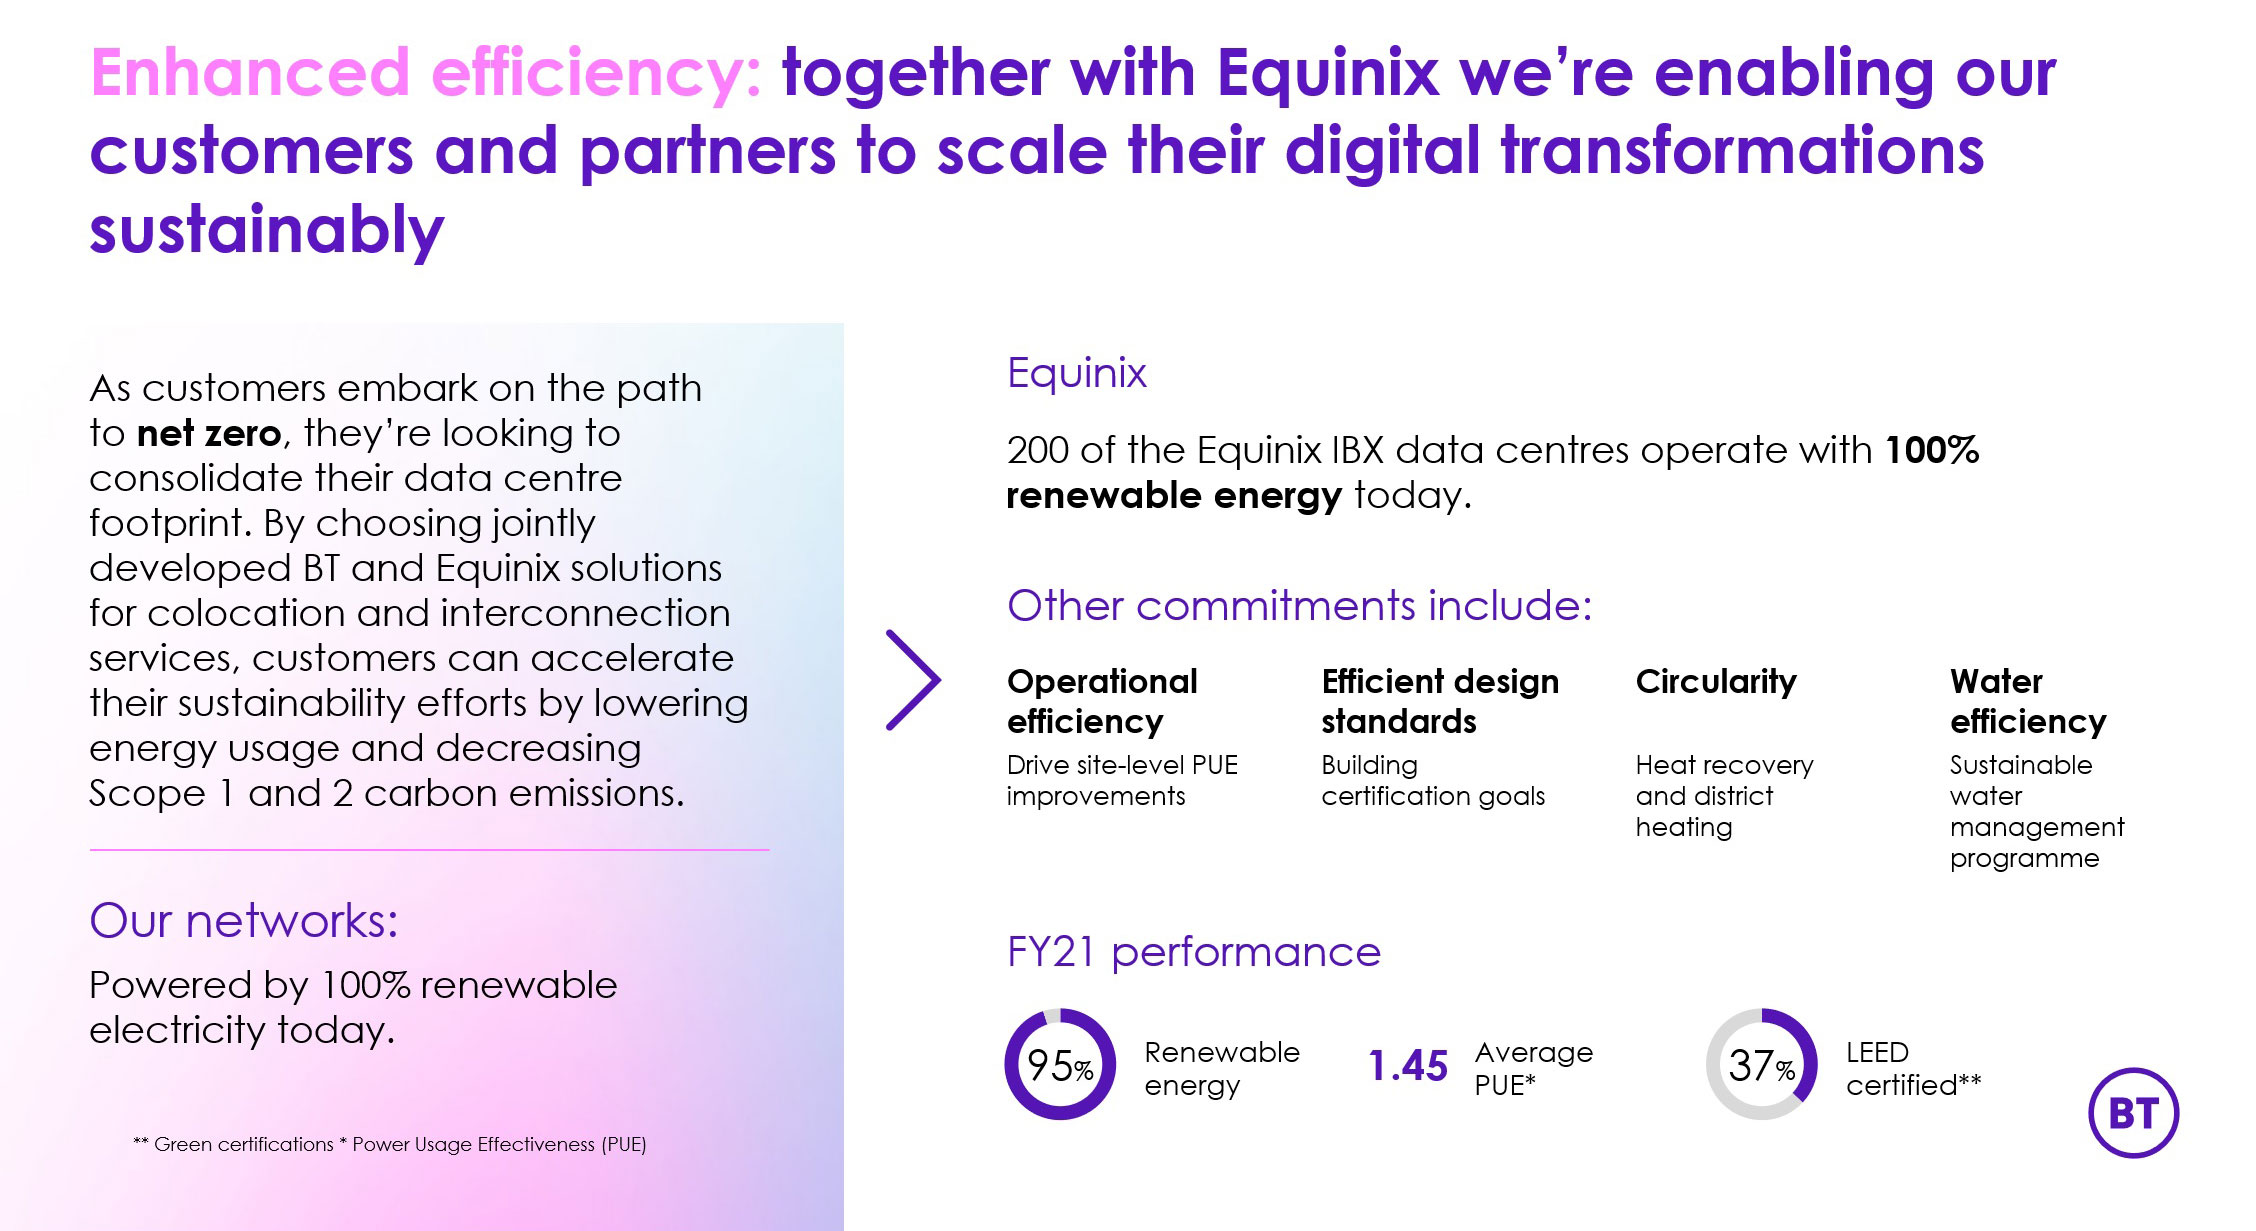 Together with Equinix we’re enabling our customers and partners to scale their digital transformations sustainably